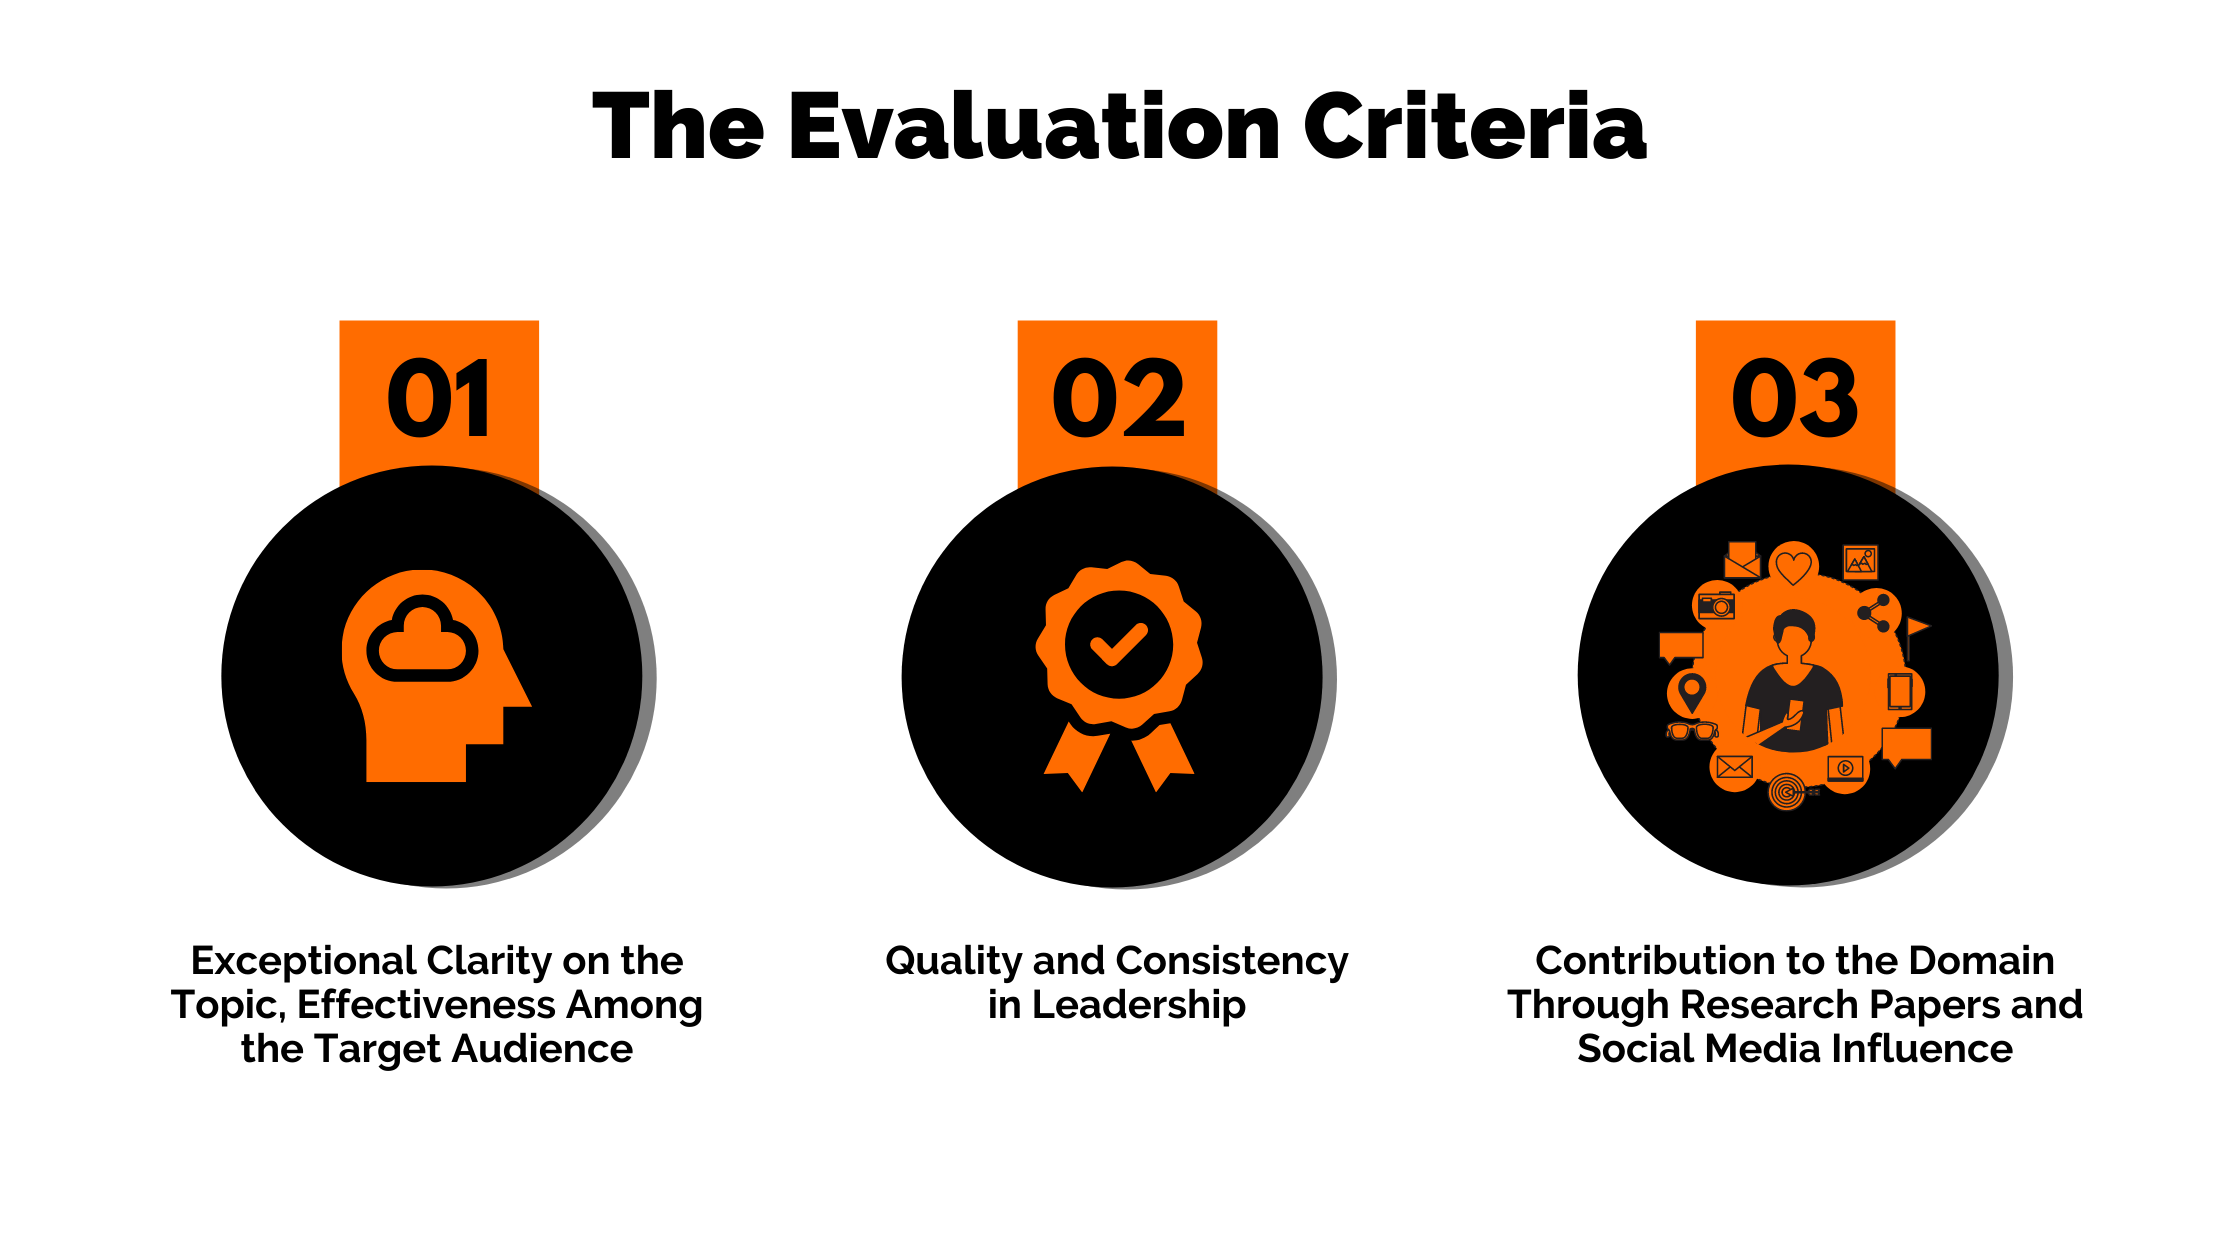 Whizlabs Global Thought Leader - The Evaluation Criteria